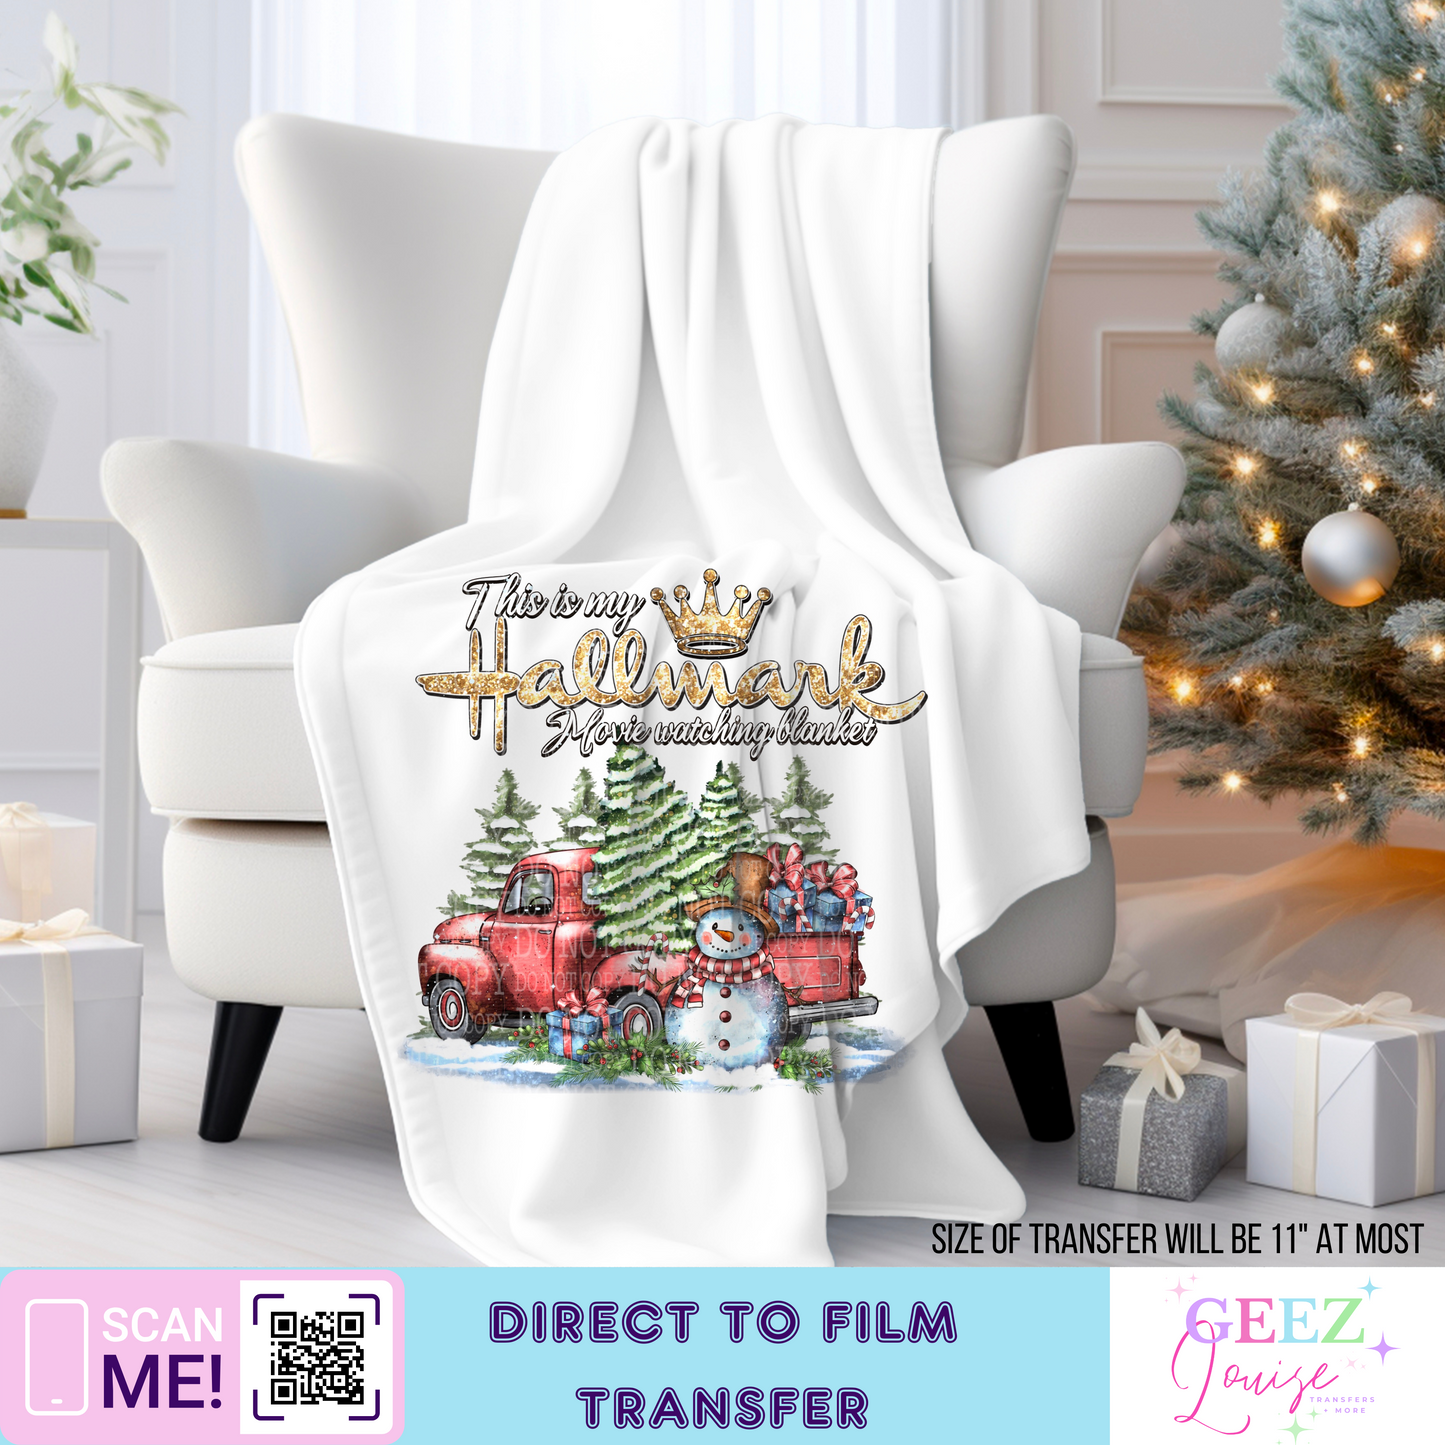 Movie blanket Christmas- Direct to Film Transfer - made to order